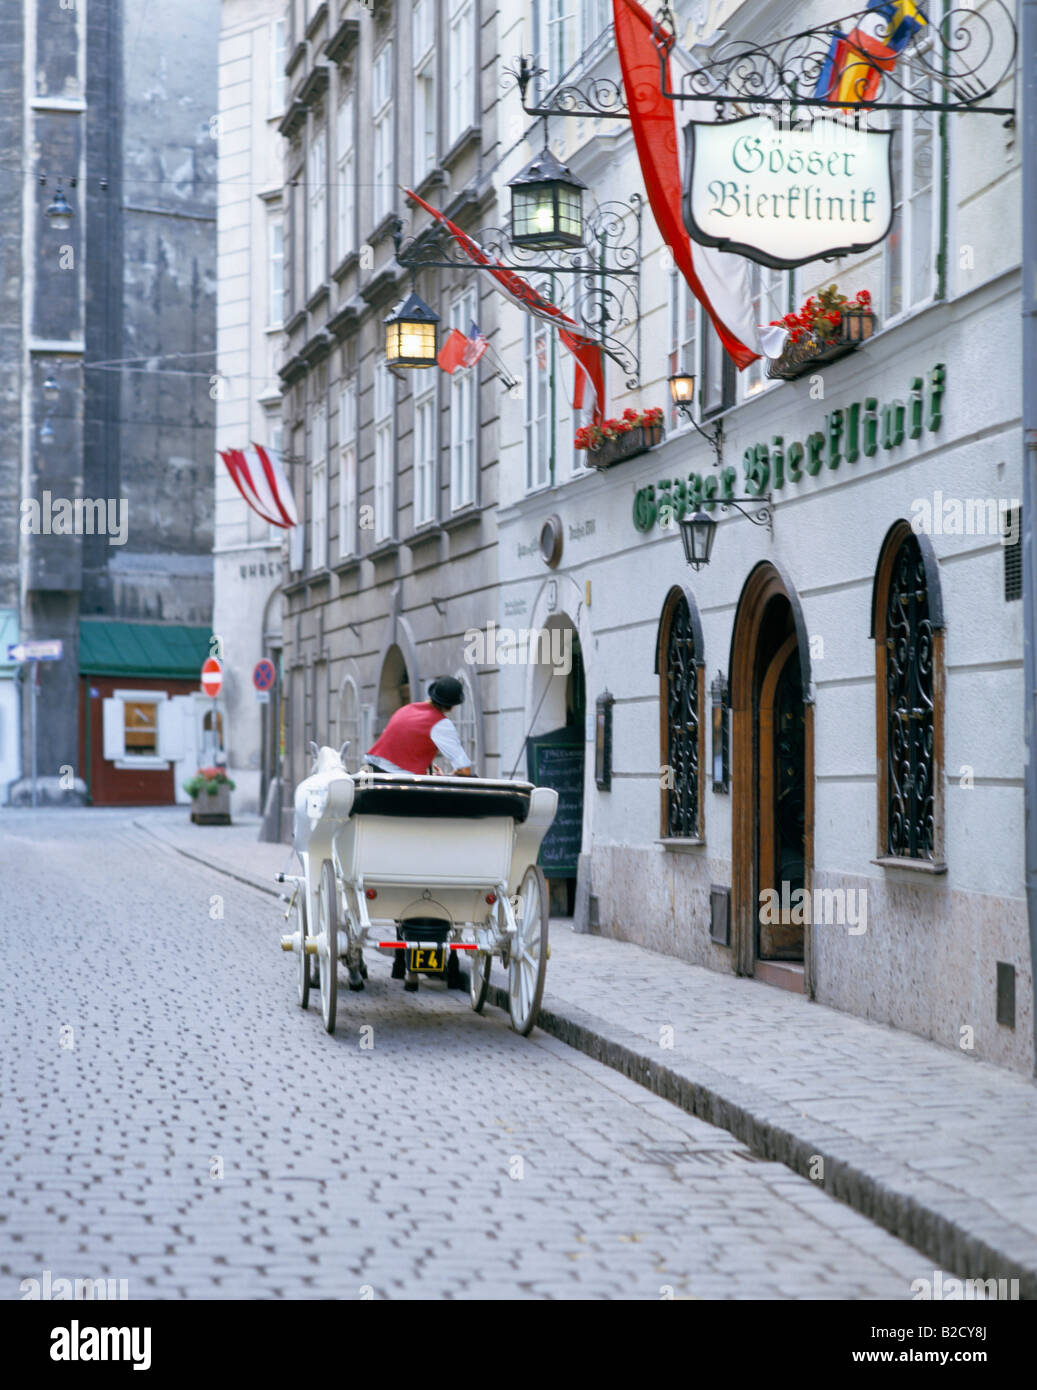 Street scene with Fiaker in the Old Town Austria, Stock Photo